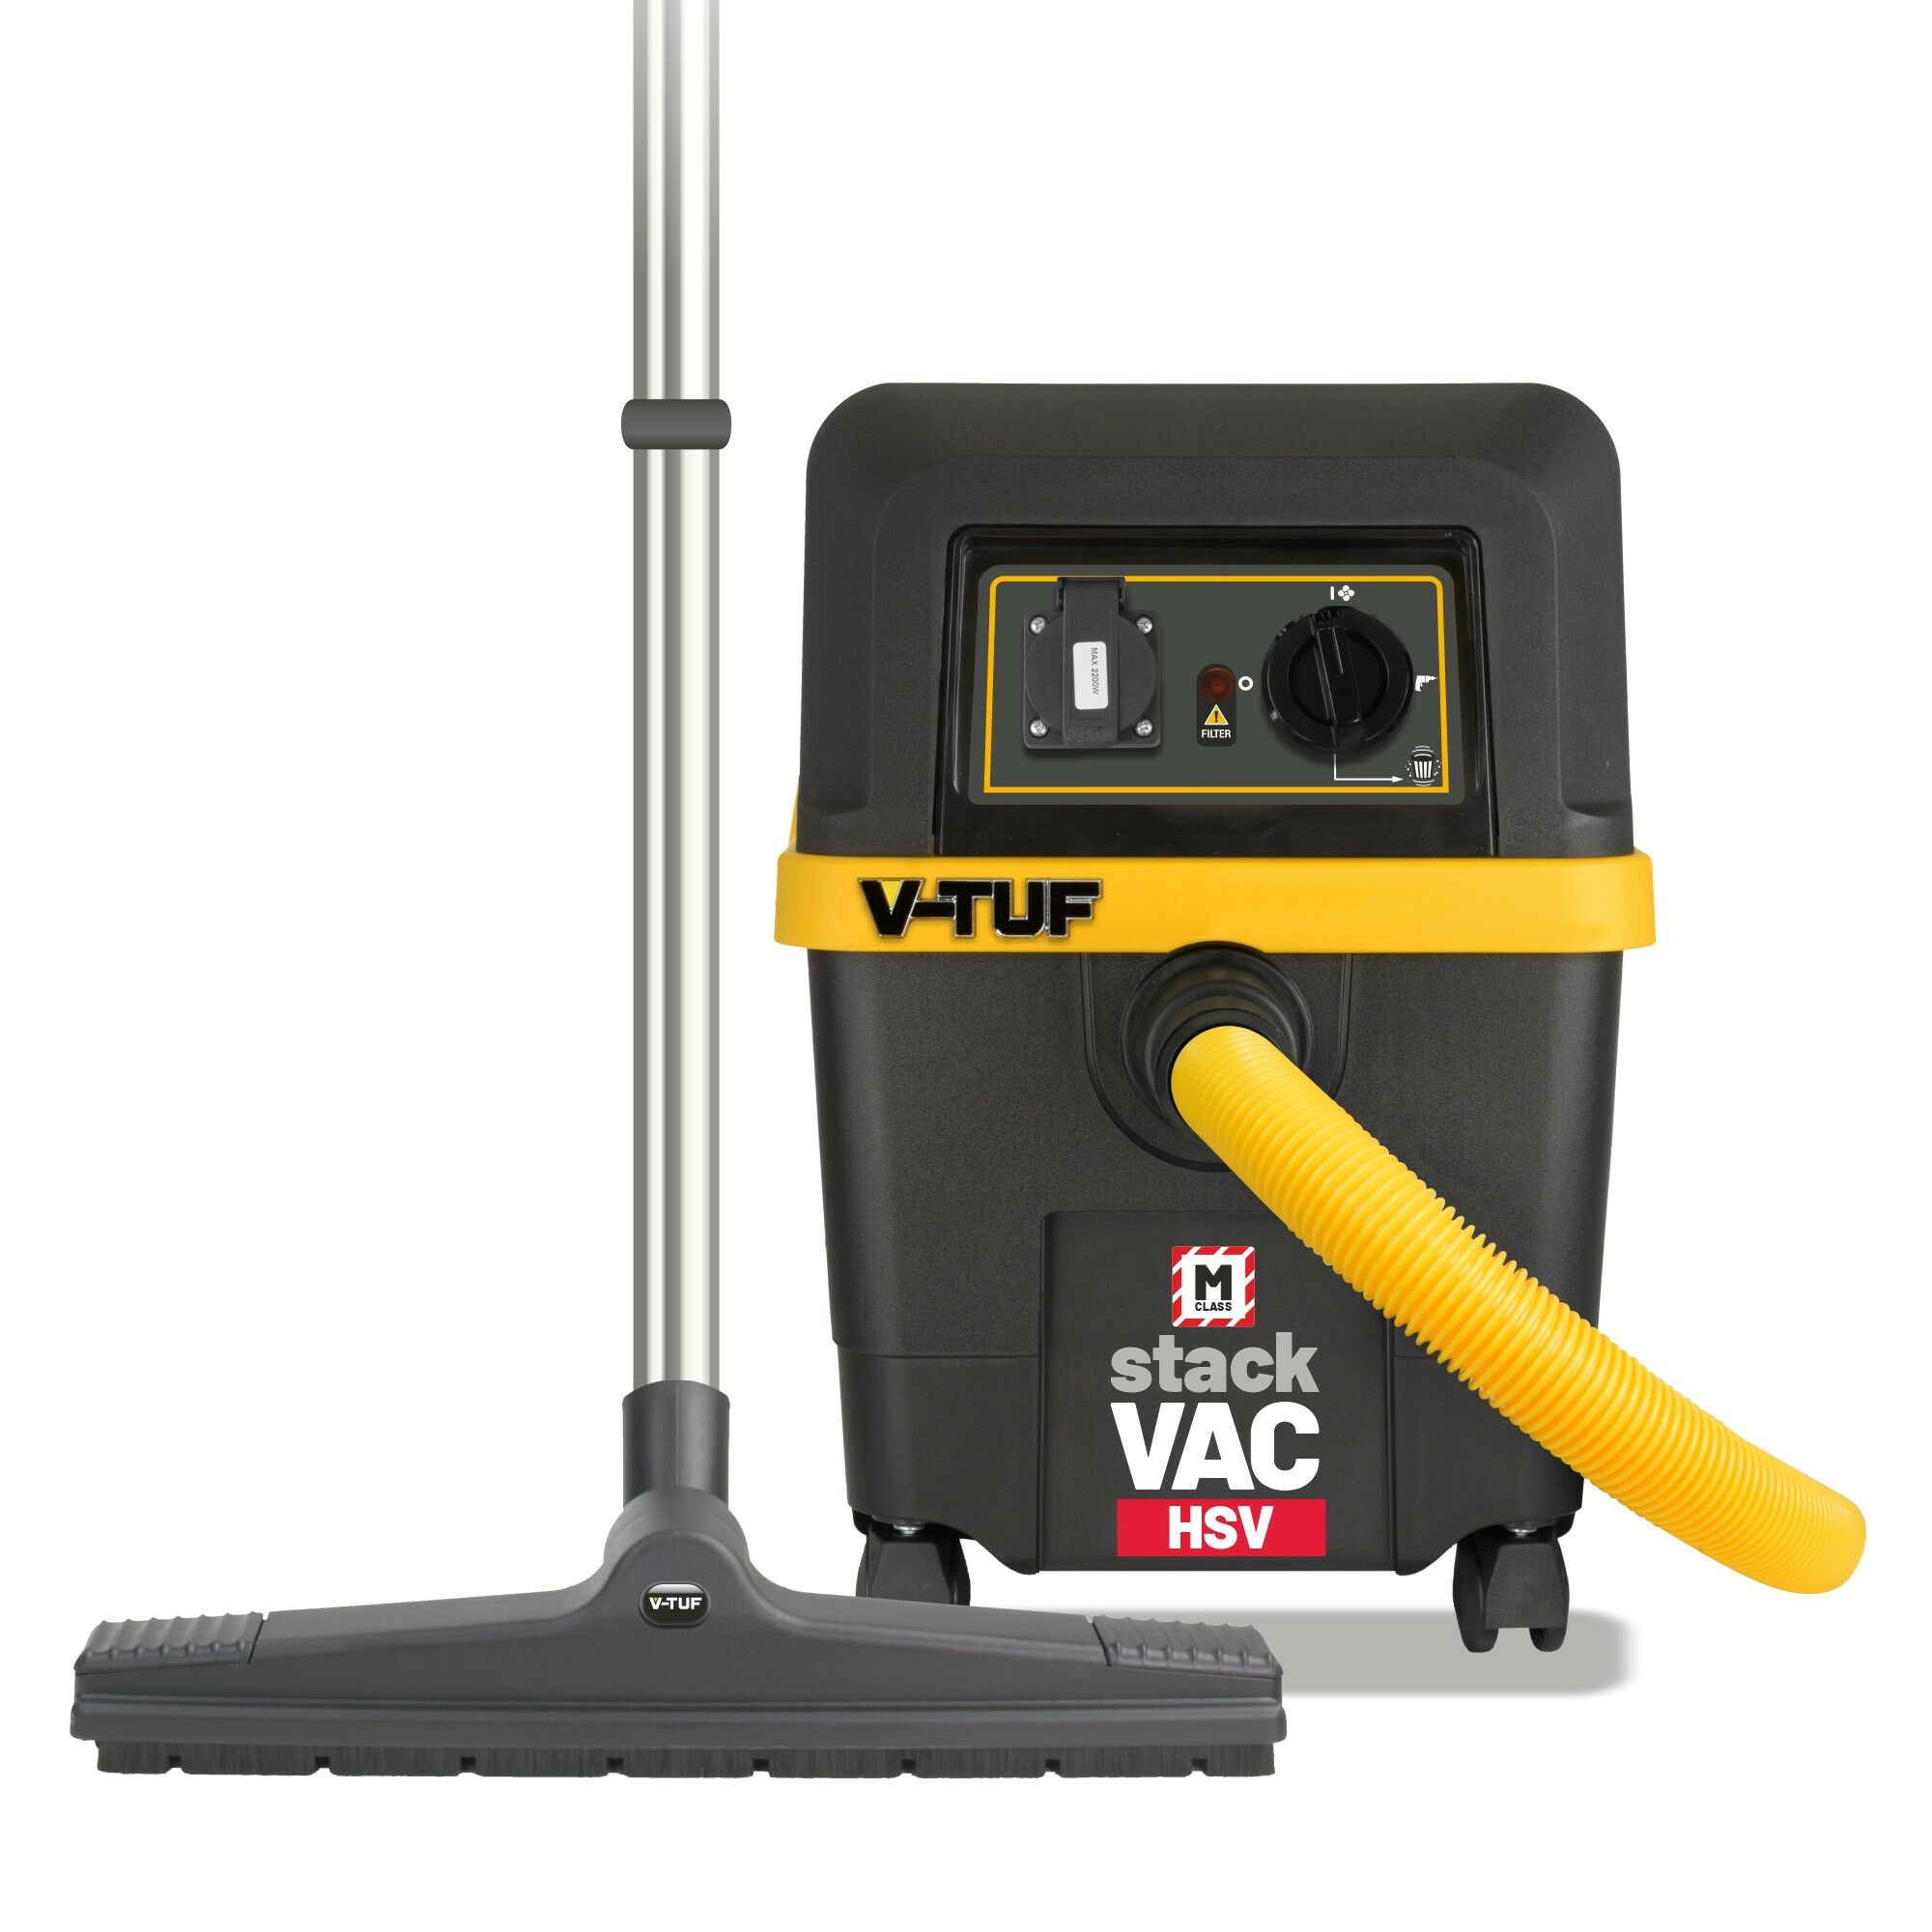 V-TUF STACKVAC HSV 110v 30L M-Class Dust Extractor Wet & Dry - with Power Take Off - Health & Safety Version 